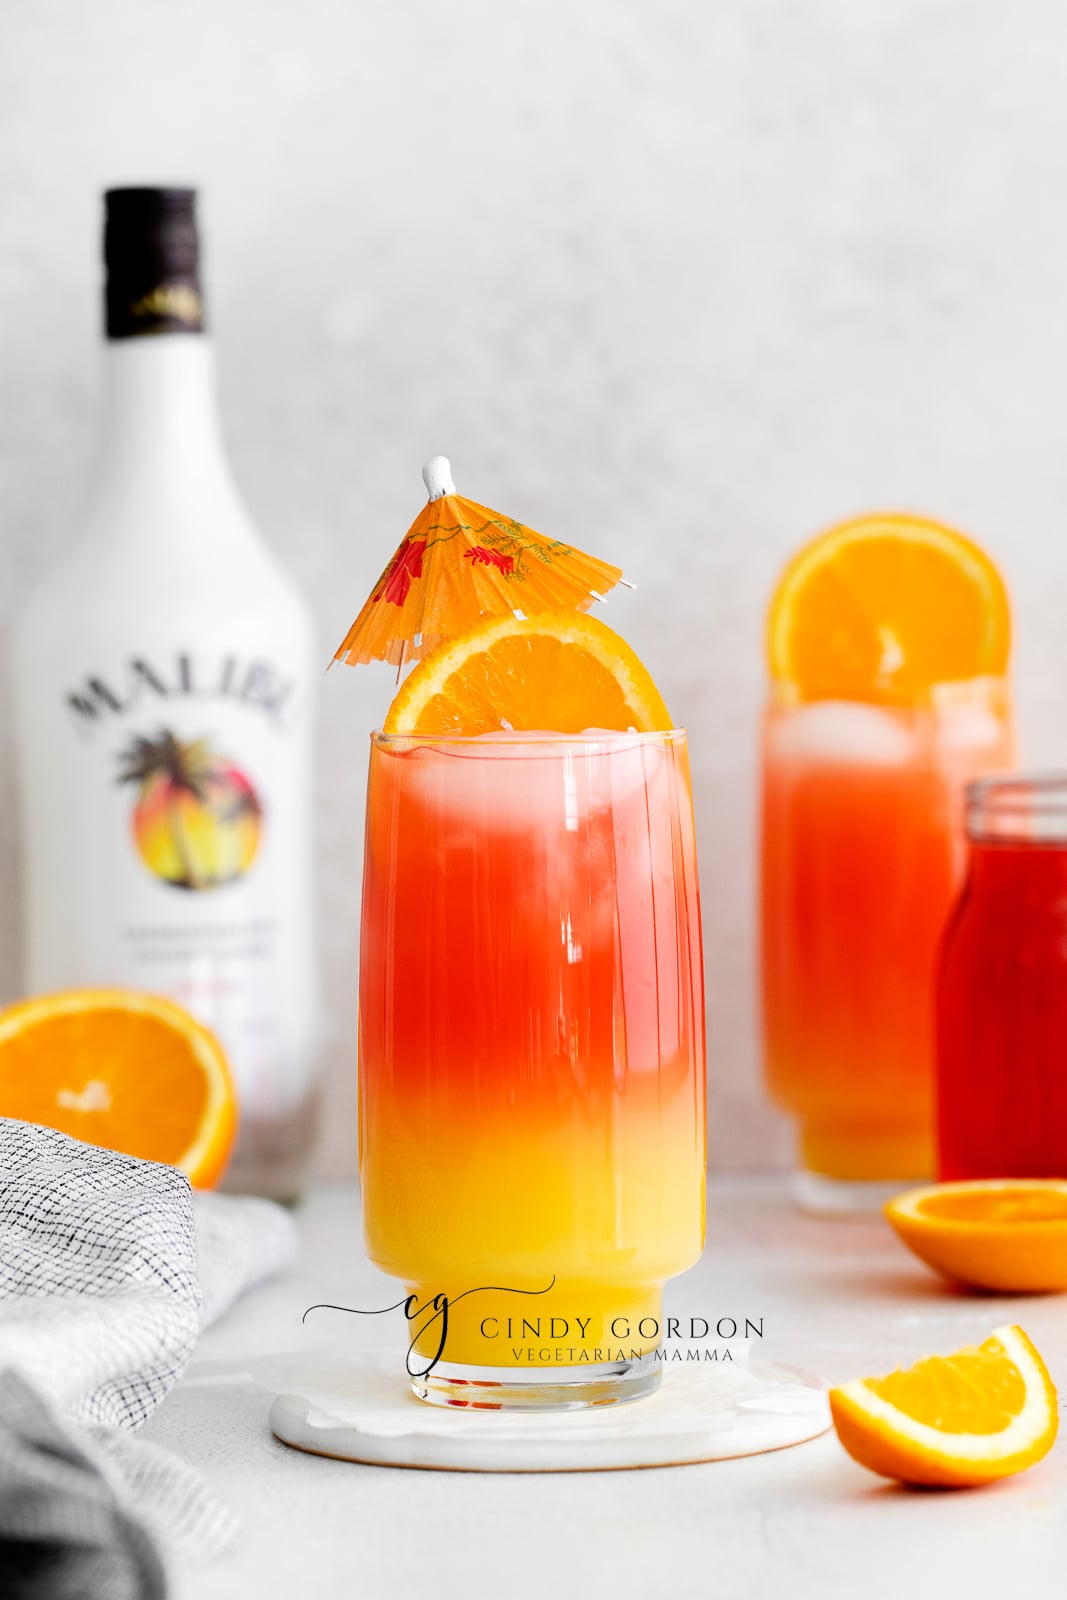 Sex on the beach drink malibu - 2 tall clear glasses filled with half moon ice, orange liquid on the bottom, red liquid on top and orange wheel on very top. Malibu rum bottle in the back. Orange slices on table